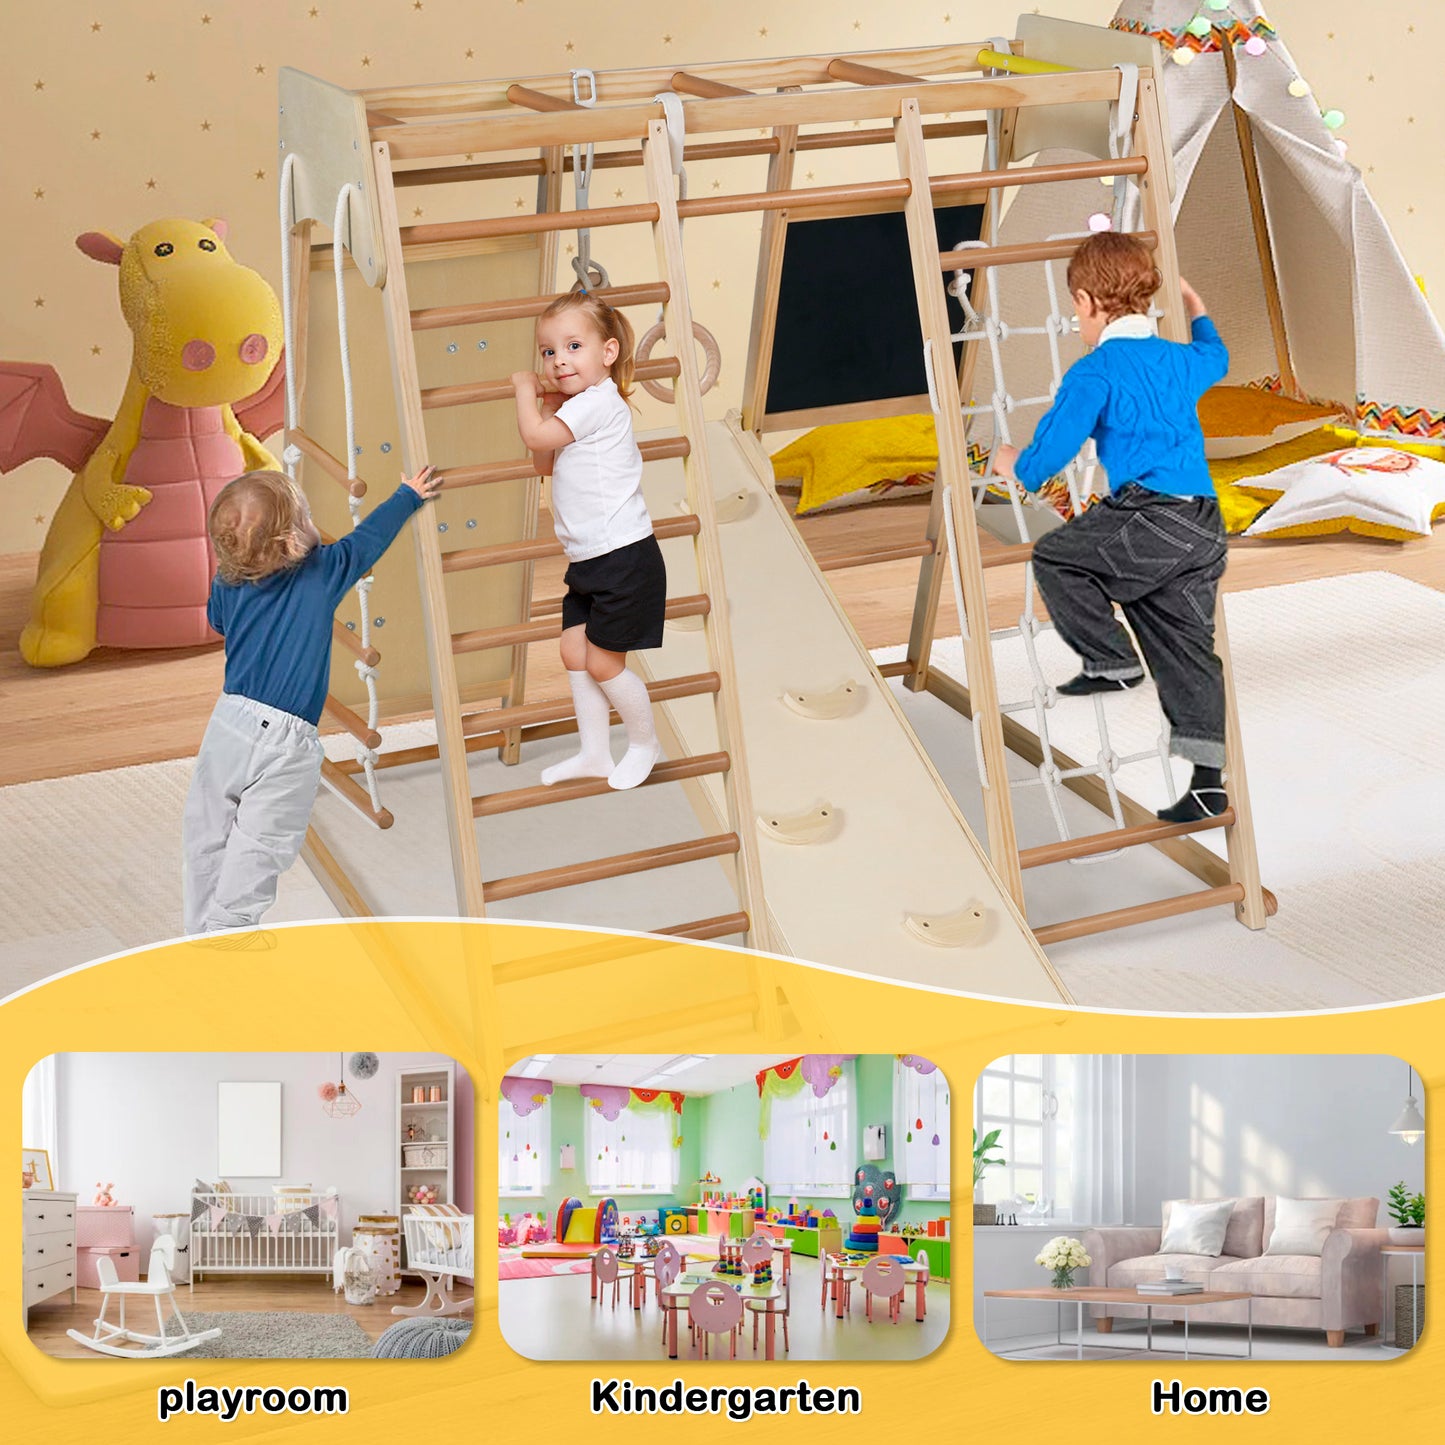 Toddler Climbing Set, 10 in 1 Kids Climber Slide Playset with Ladder/Ramp/Monkey Bar/Drawing Board, Indoor Wooden Jungle Gym, Natural